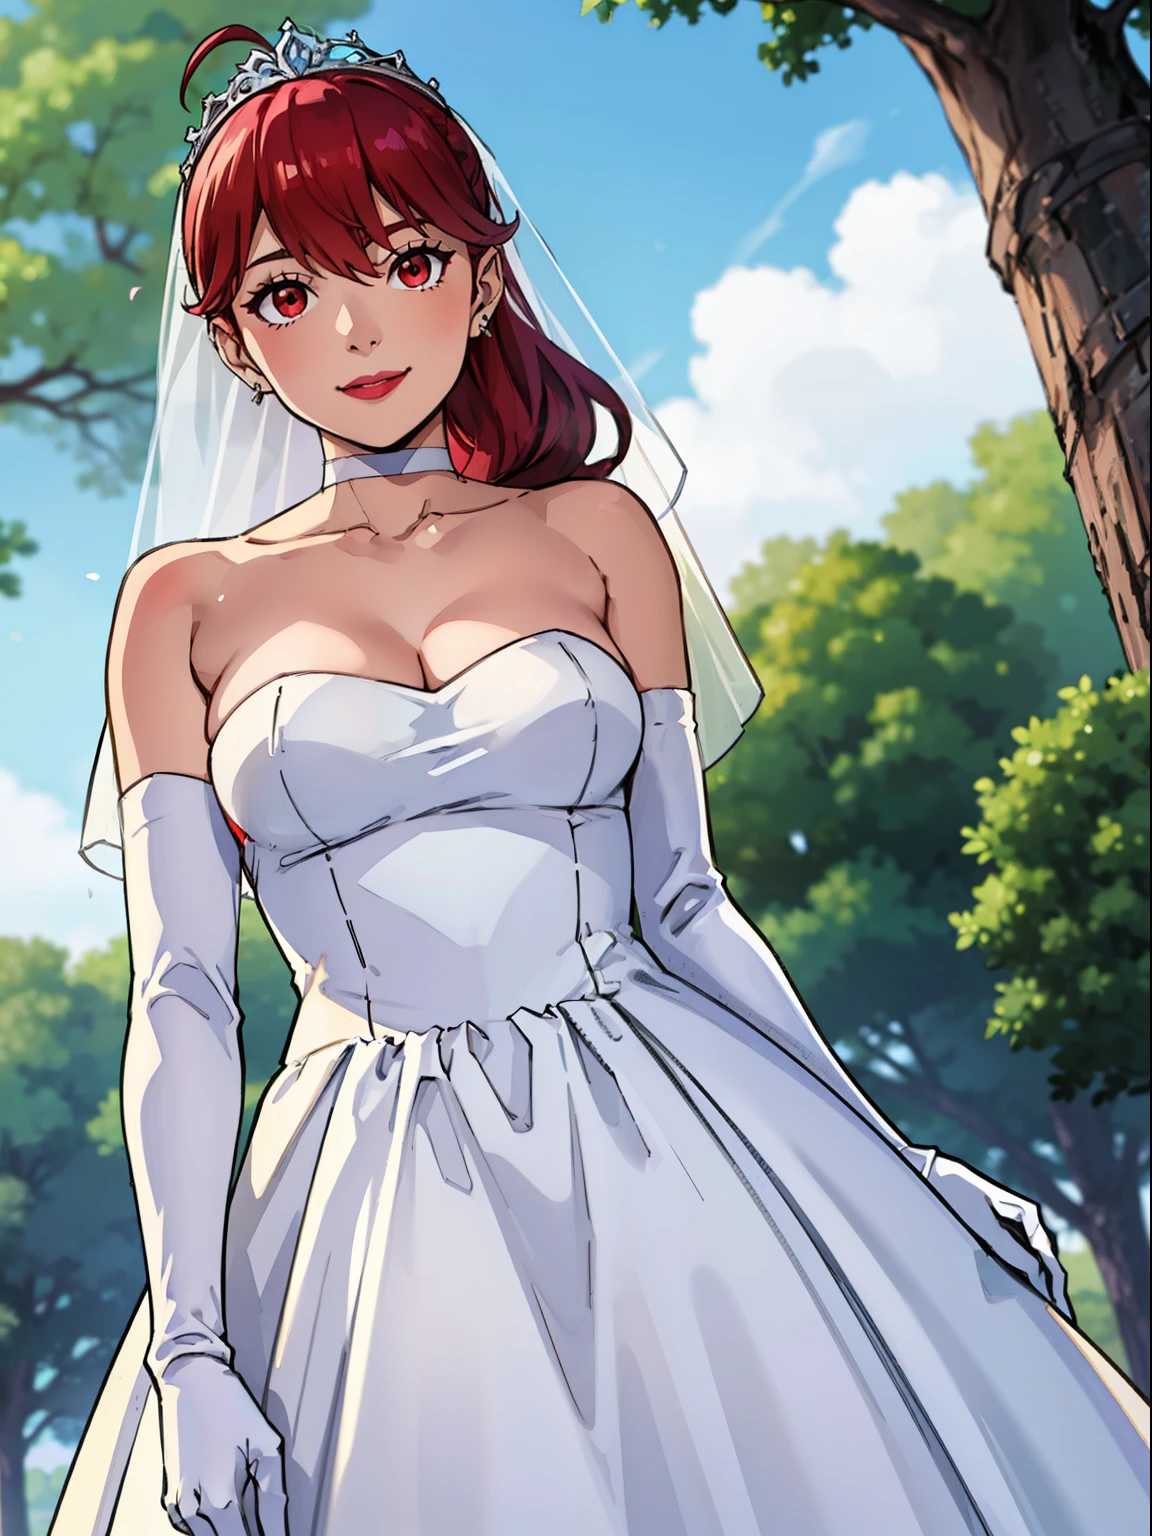 kasumi, red hair, pony tail, red eyes,earrings ,lipstick, eye shadow, makeup, hair between eyes, ahoge, hair ornament, gloves, dress, cleavage, bare shoulders, collarbone, white oprea gloves, white gloves, white dress, strapless, white choker, tiara, veil, strapless dress, wedding dress, bridal veil, beautiful woman, perfect body, perfect breasts, wearing a wedding dress, ball gown, in the park trees, wedding decorations, looking at the viewer, warm smile, realism, masterpiece, textured skin, super detail, high detail, high quality, best quality, 1080p,